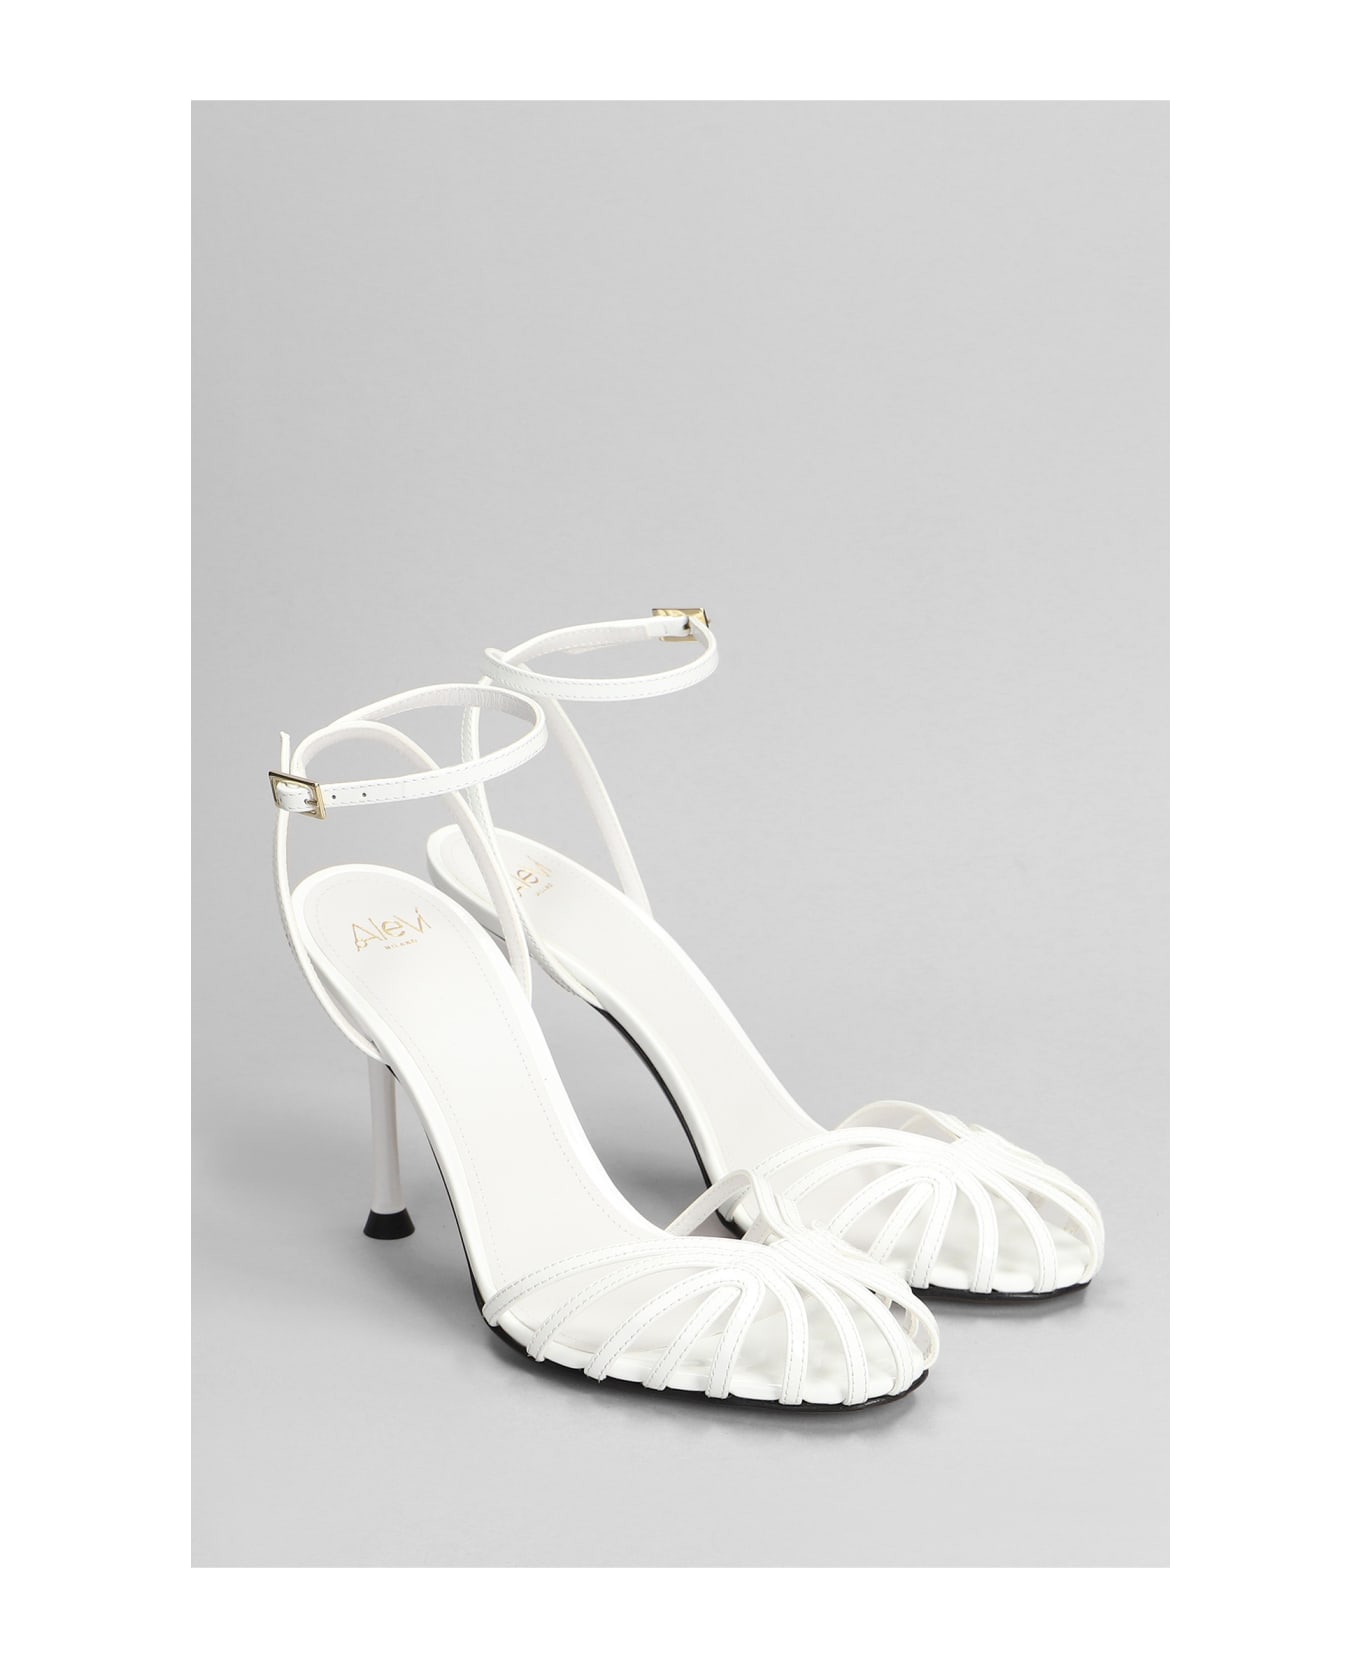 Alevì Ally 095 Sandals In White Patent Leather - white